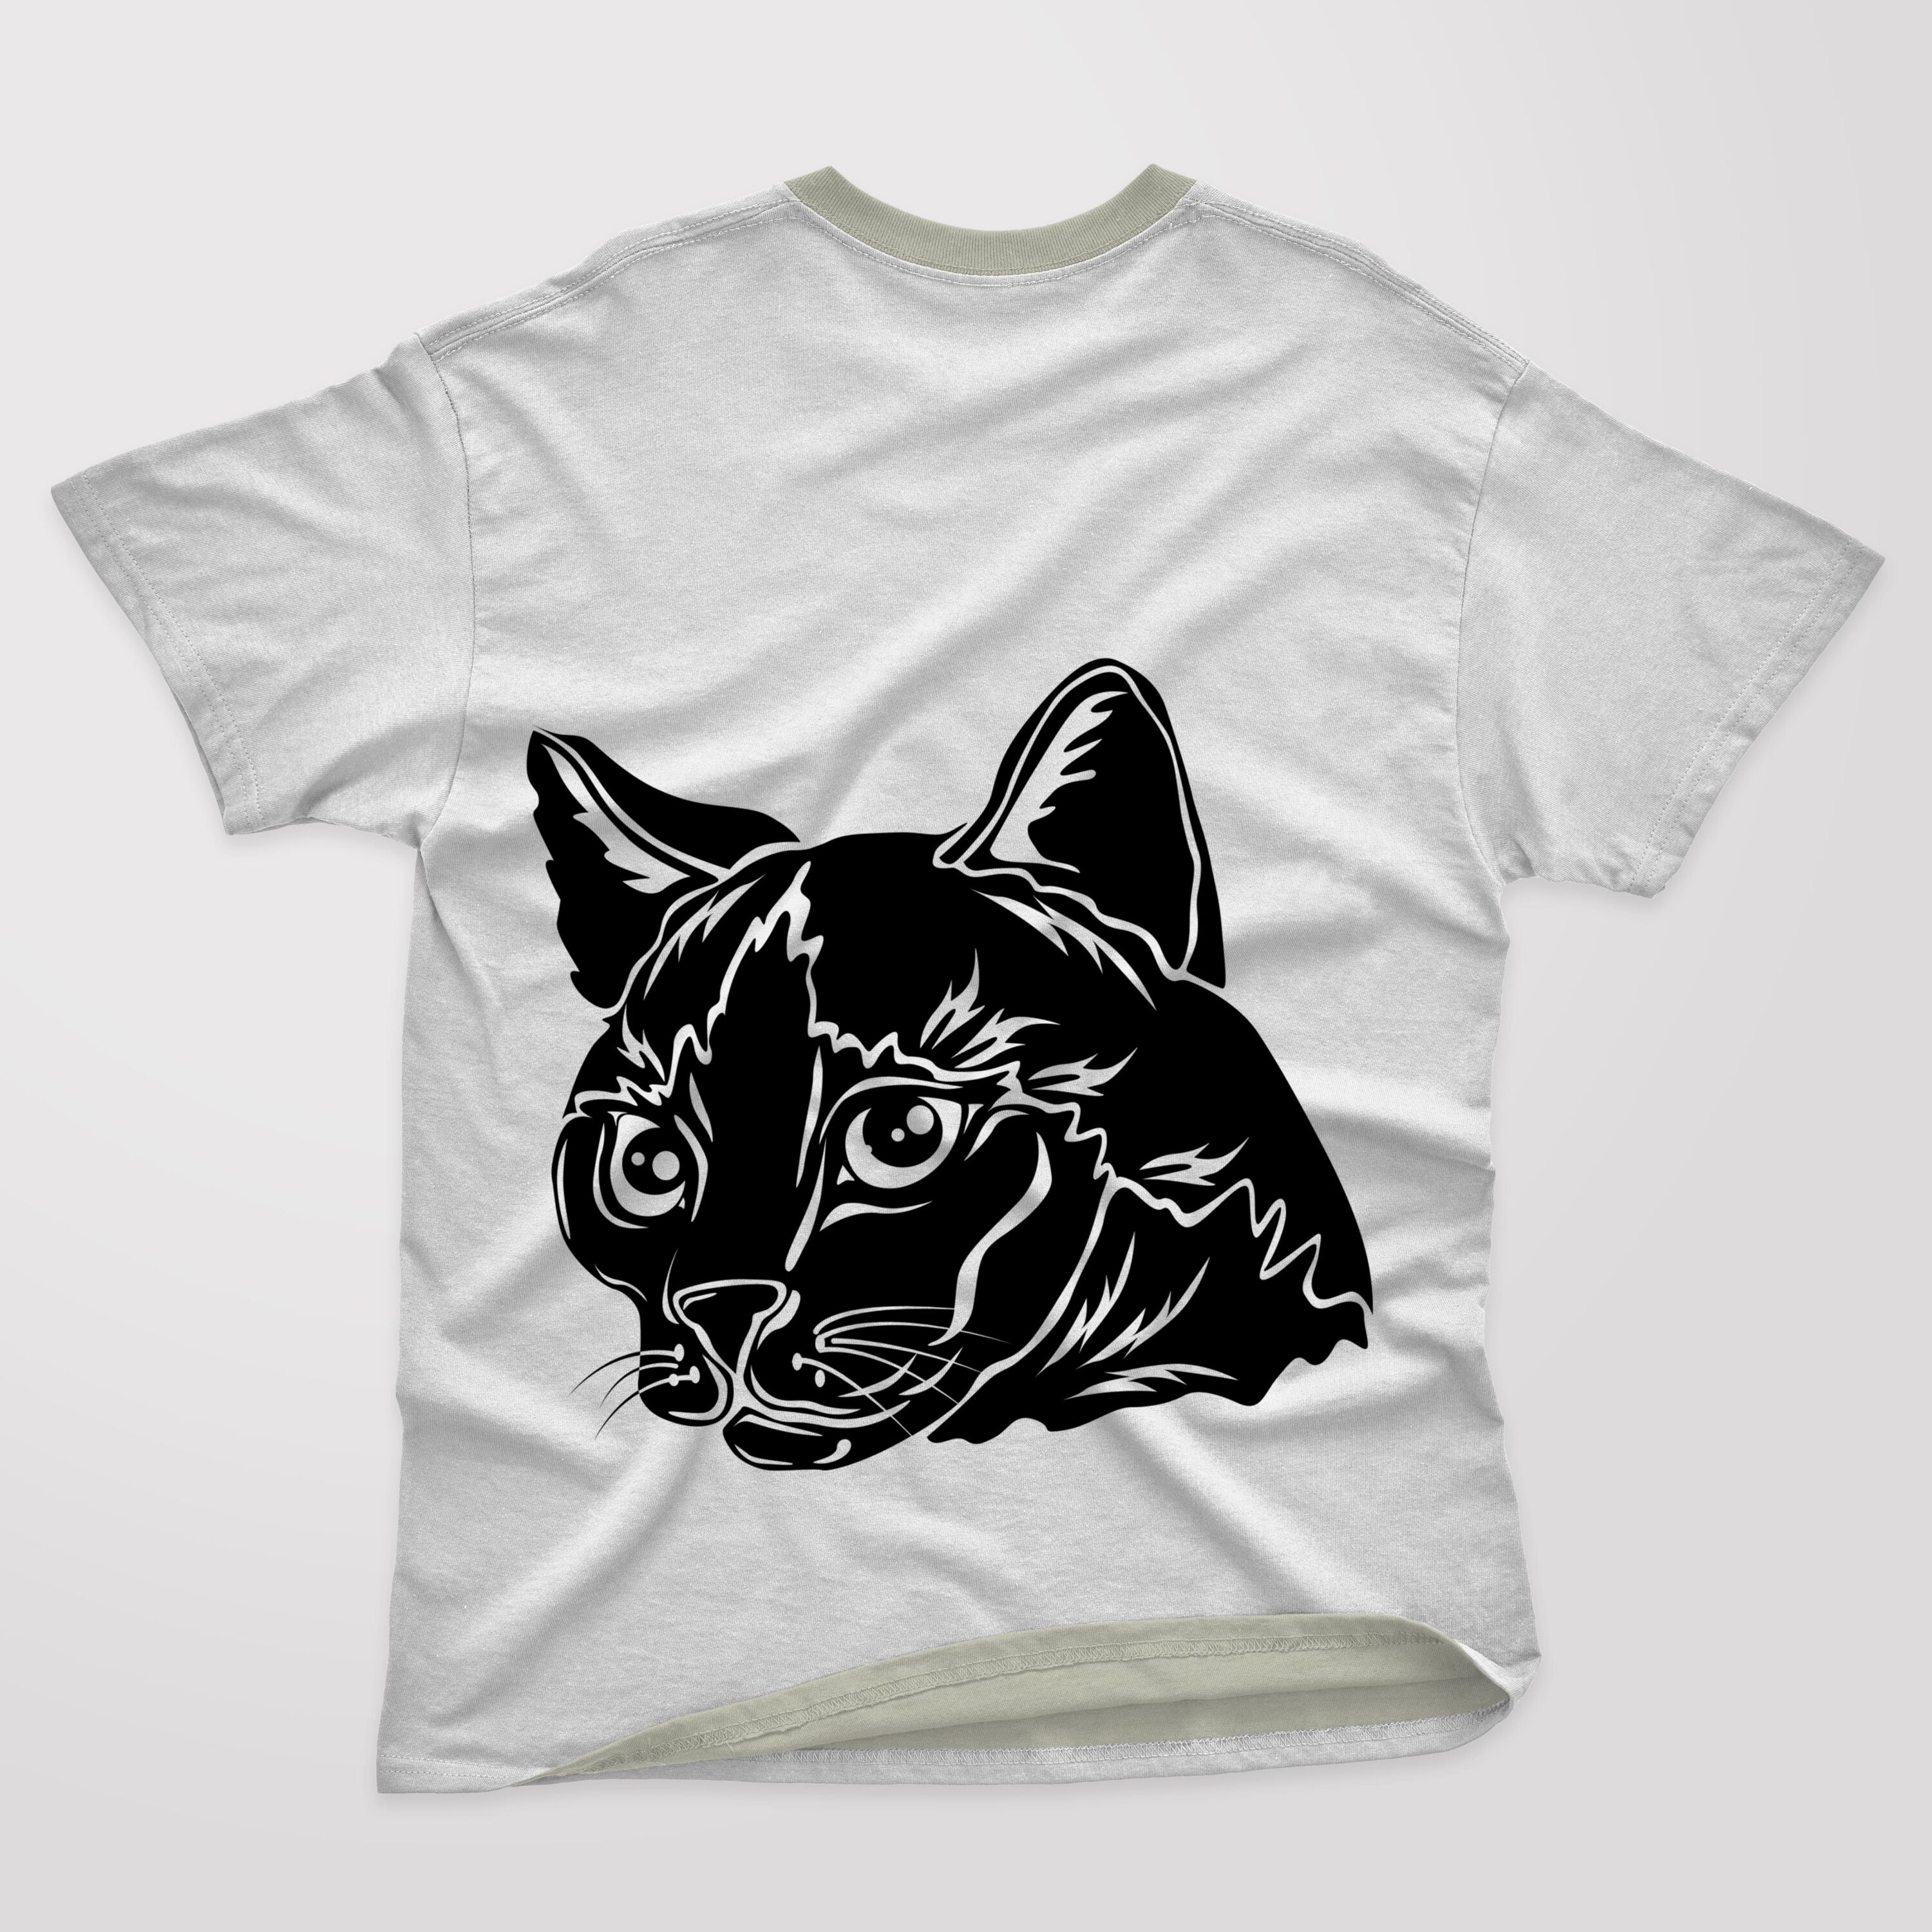 White T-shirt with a grey collar and a silhouette face of a cute cat.